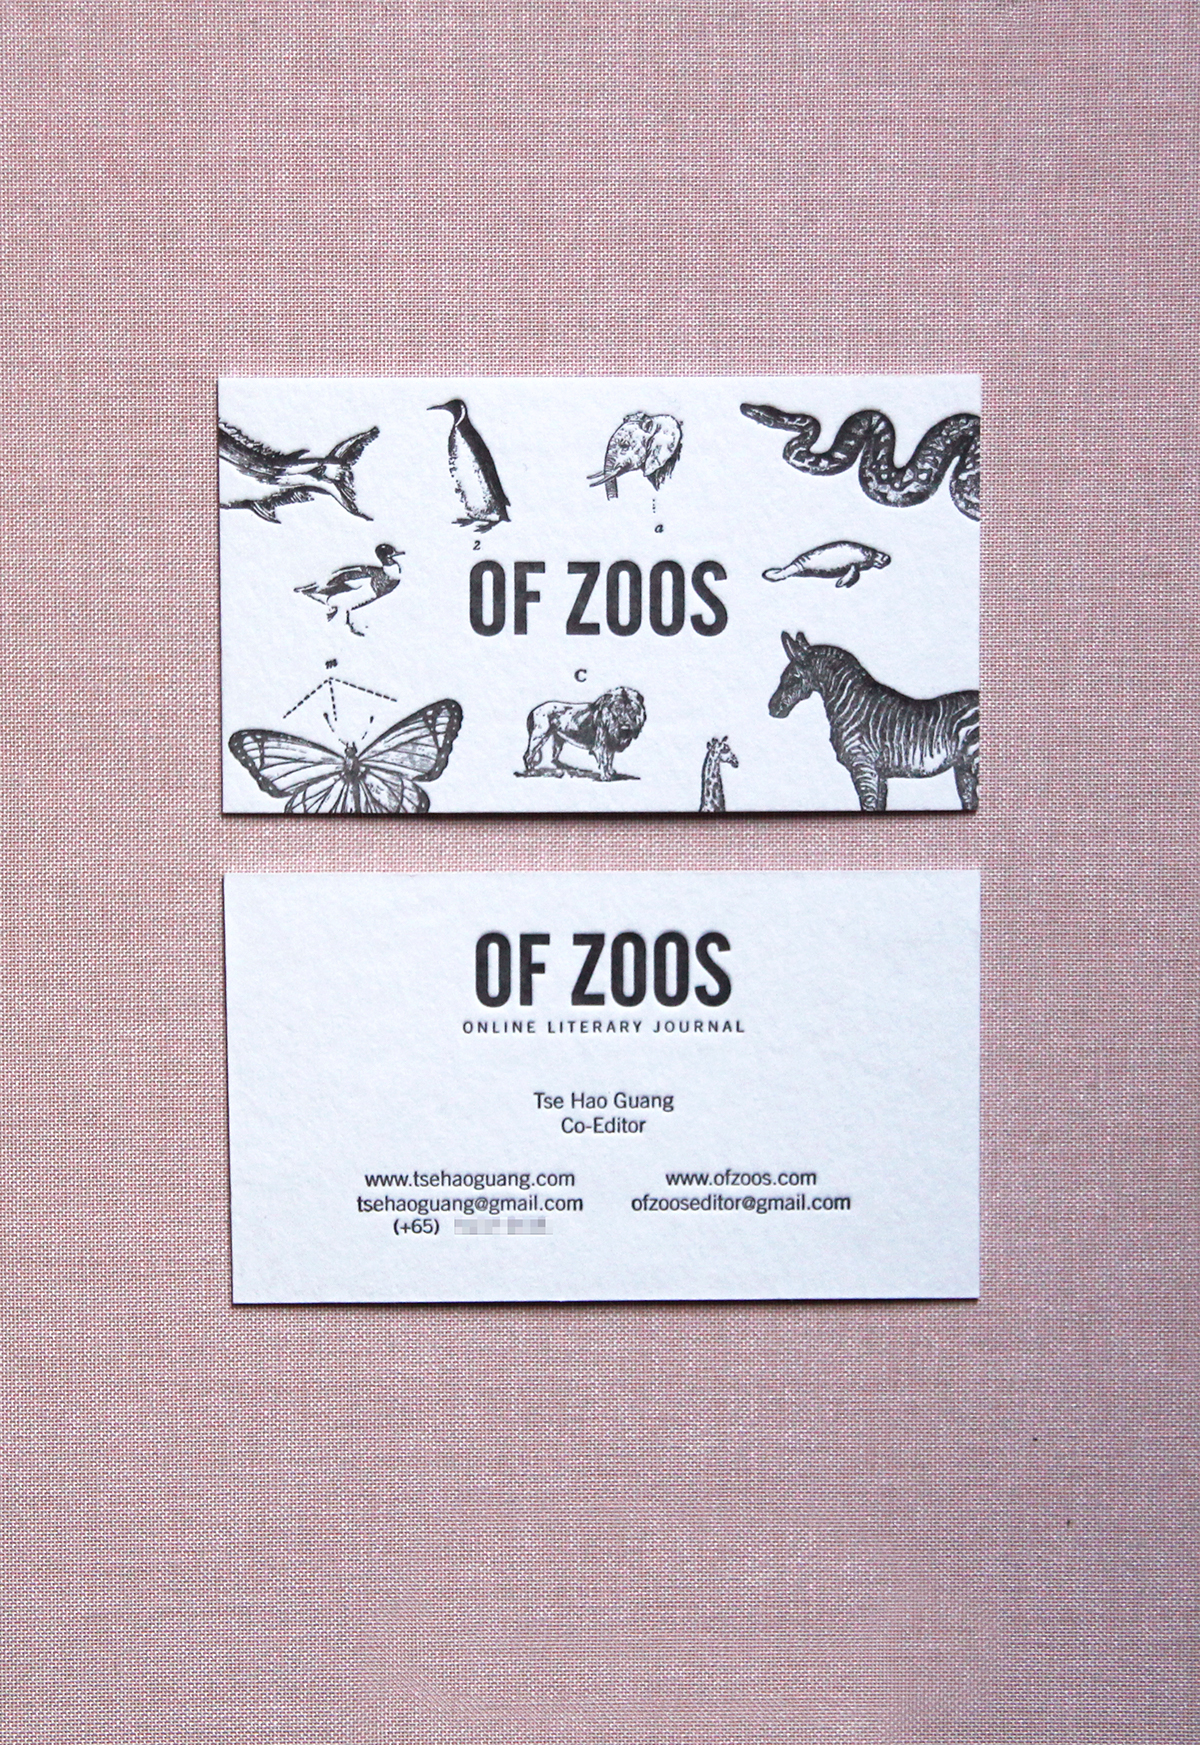 business card Name card OF ZOOS Tse Hao Guang Kimberly Lim writer poet singapore literature the gentlemen's press letterpress